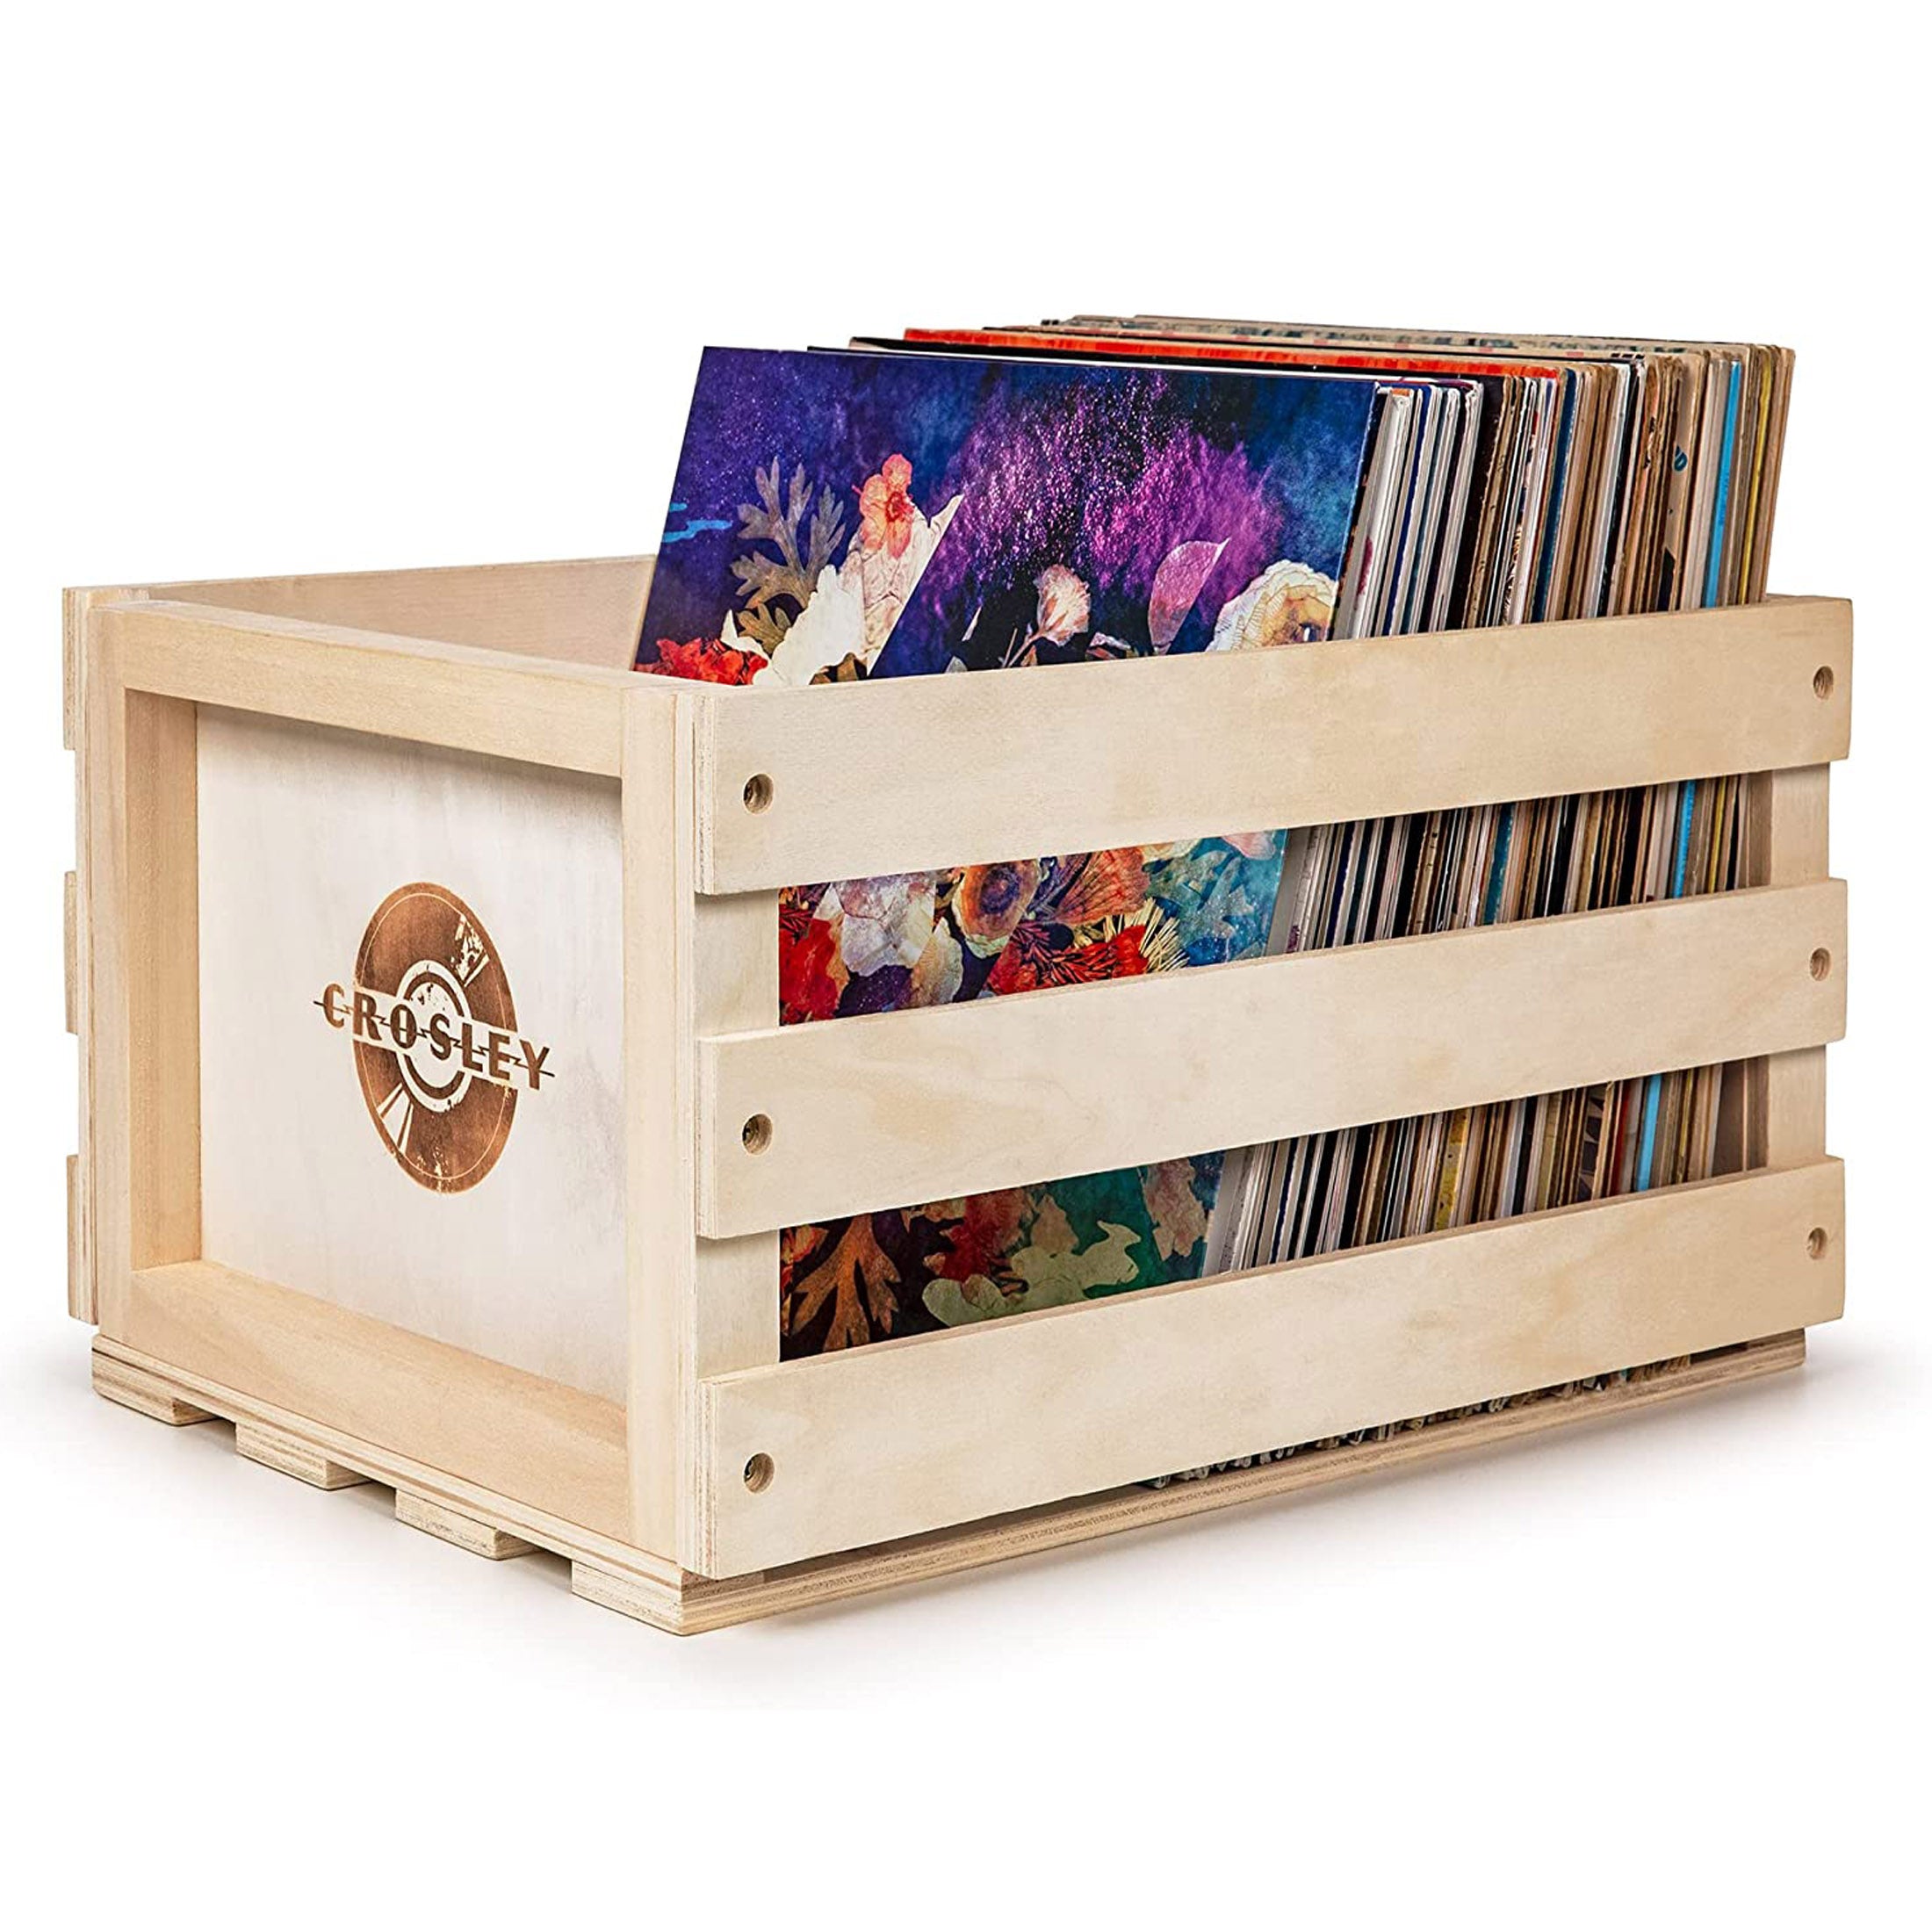 Crosley Vinyl LP Record Storage Crate Natural Wood Holds up to 75 - SILBERSHELL